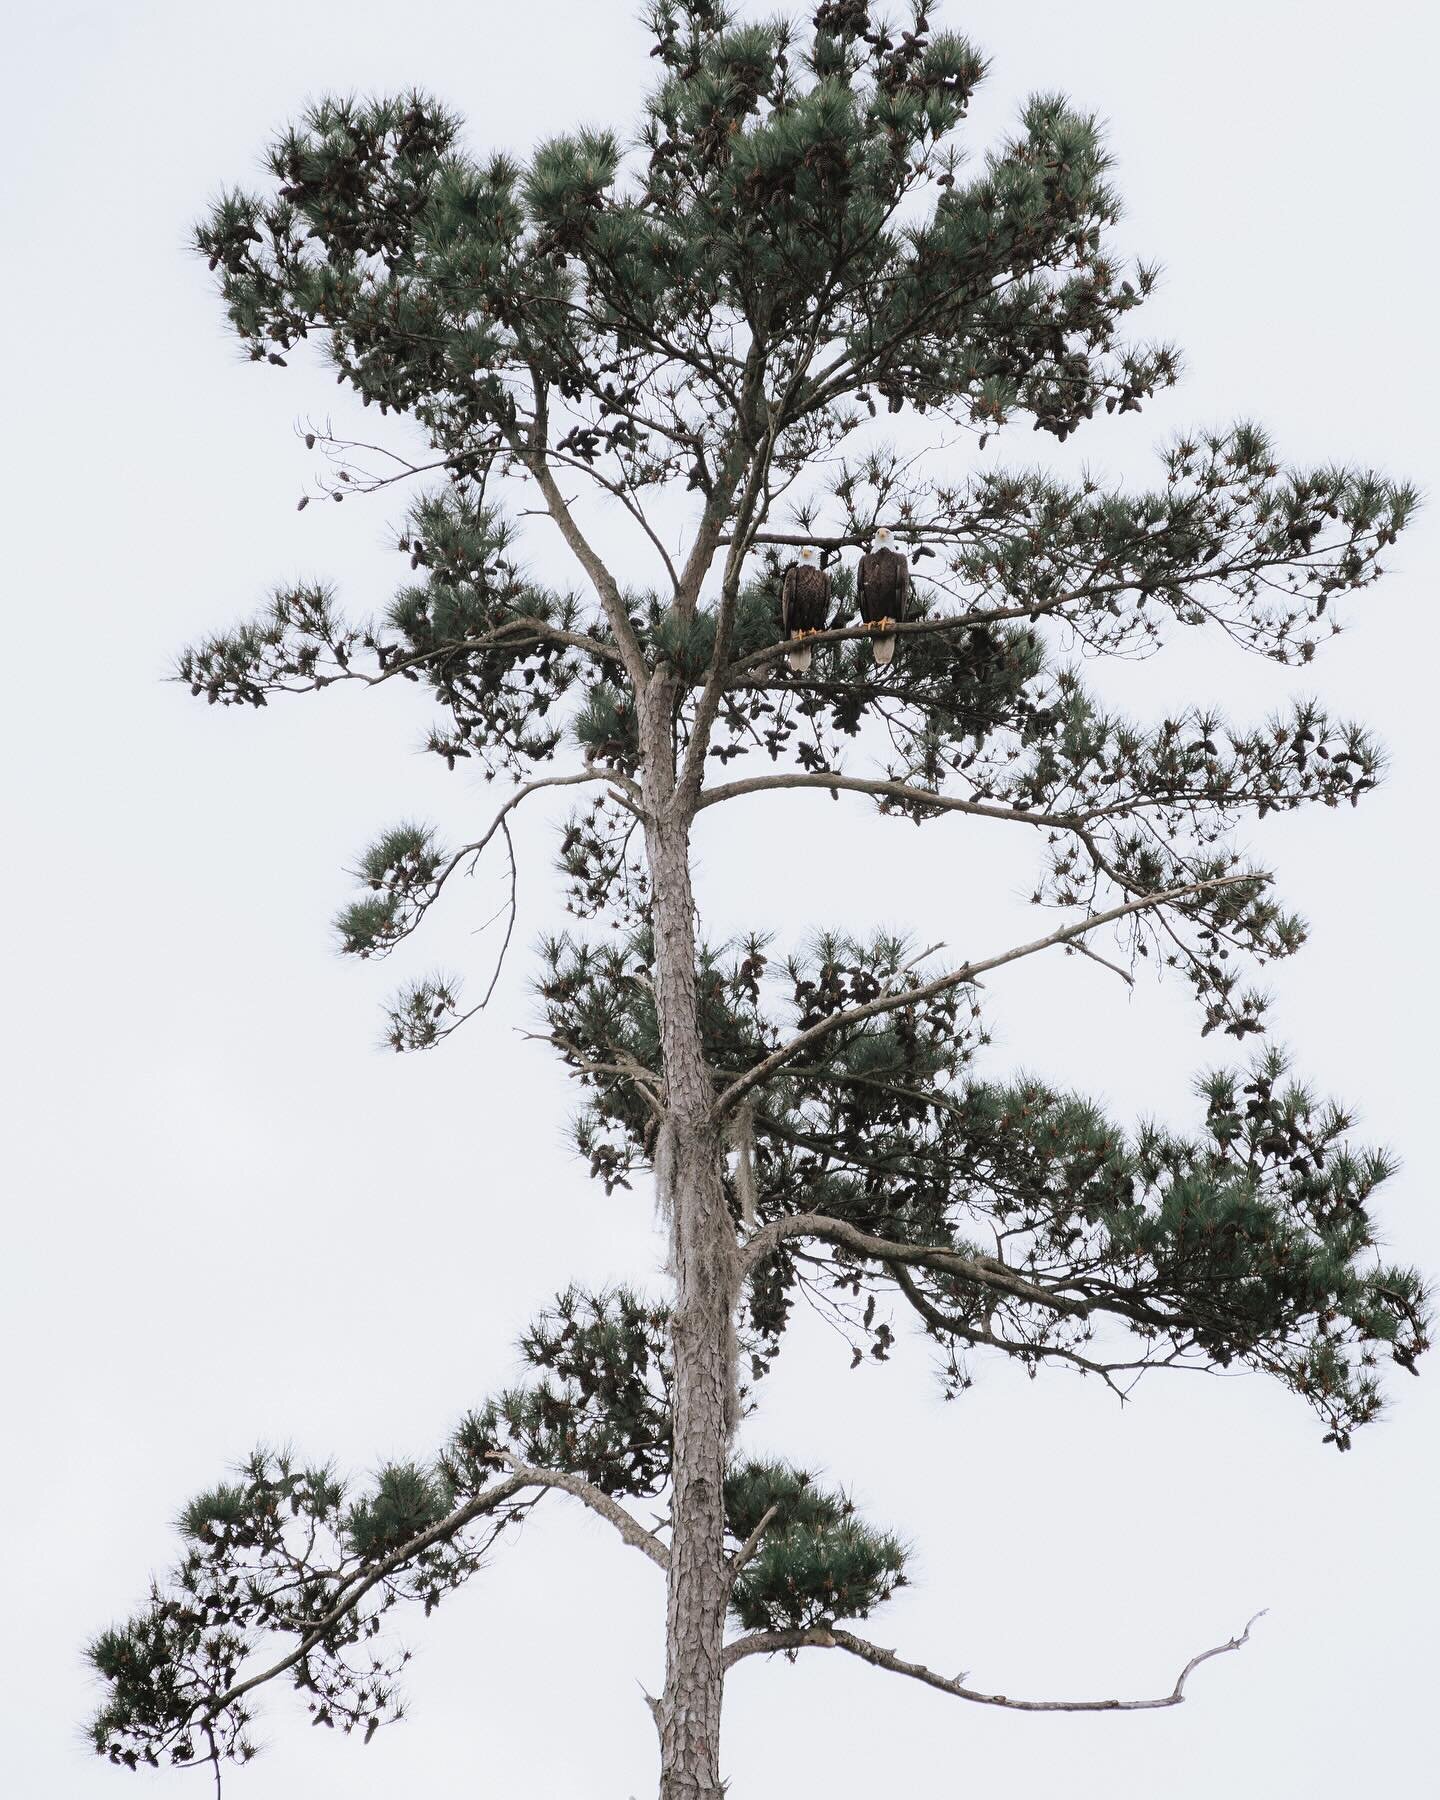 Can you see the hidden gem of this image? 
Not only a beautiful shaped tree, but a tree with not 1, but 2 Bald Eagles!!!! ❤️ I can&rsquo;t get enough of them.
.
.
.
#threeriversstatepark #birdwatchers #birdwatching #birdphotography #baldeagles #balde